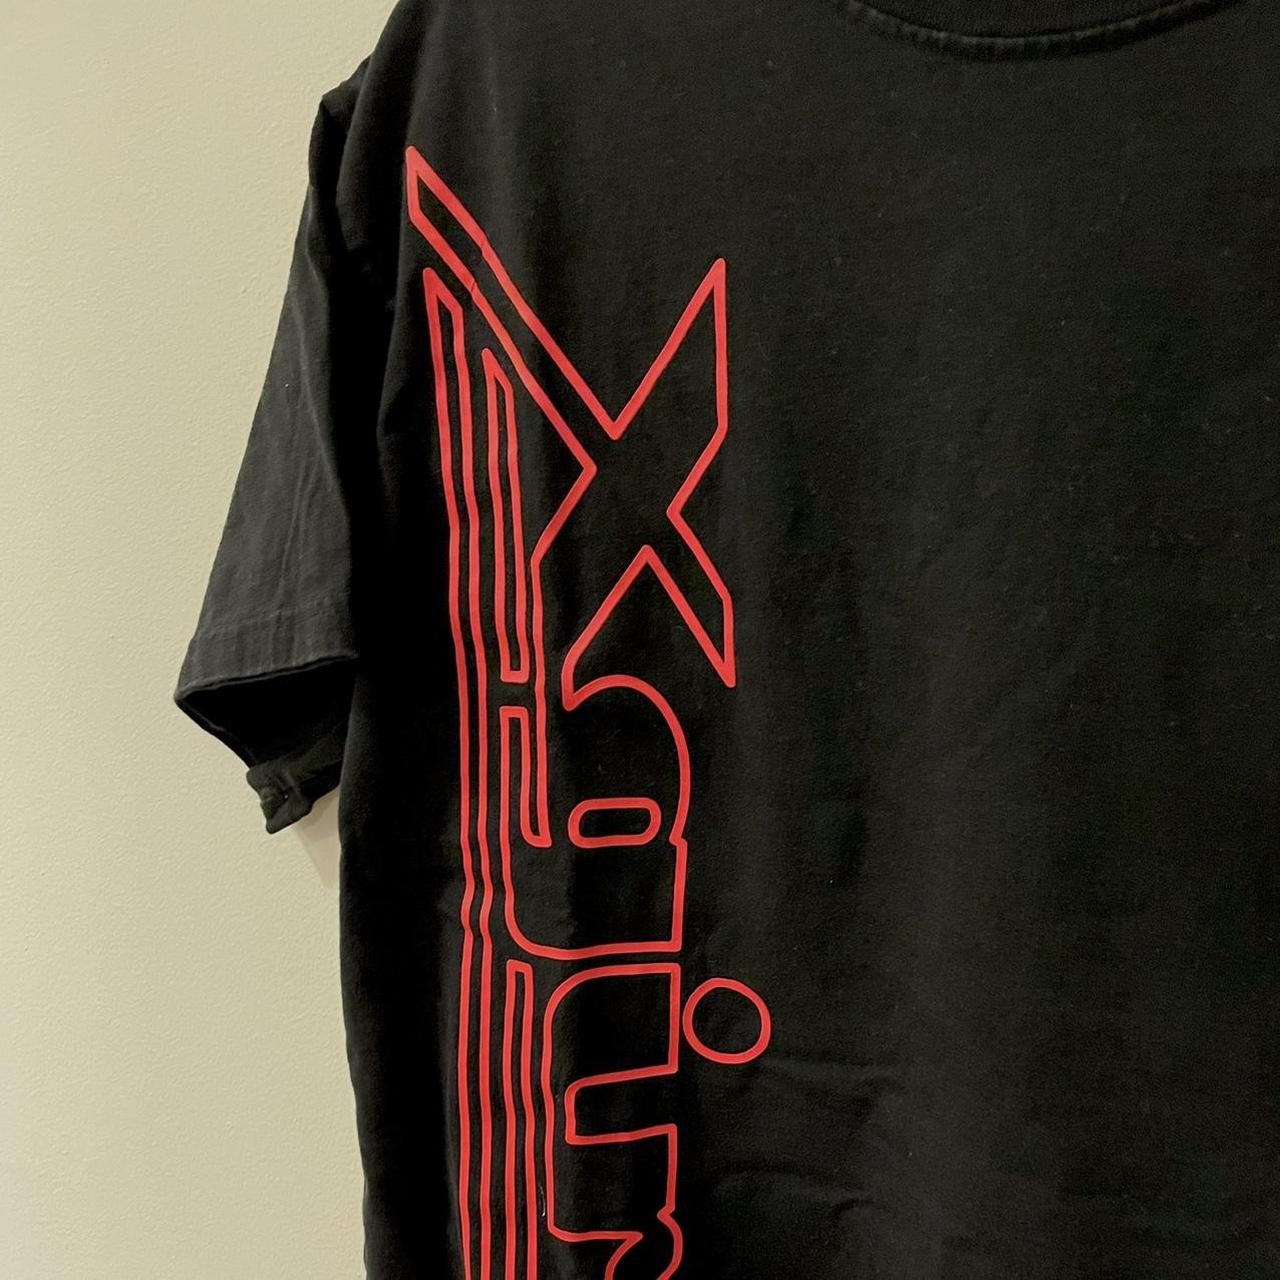 X-Girl  Women's Black and Red T-shirt (2)